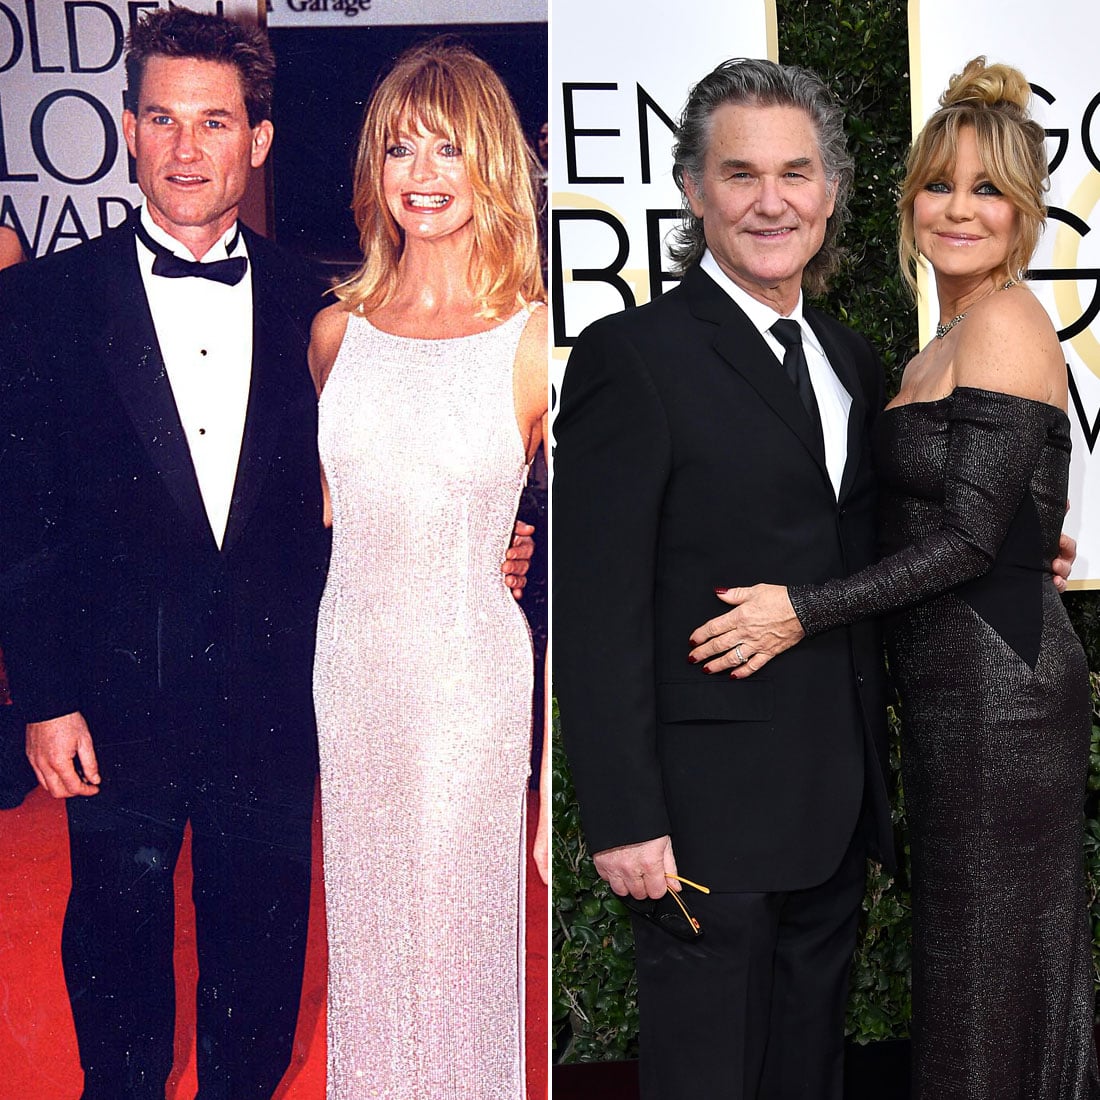 Goldie Hawn and Kurt Russell's First Golden Globe Awards ...